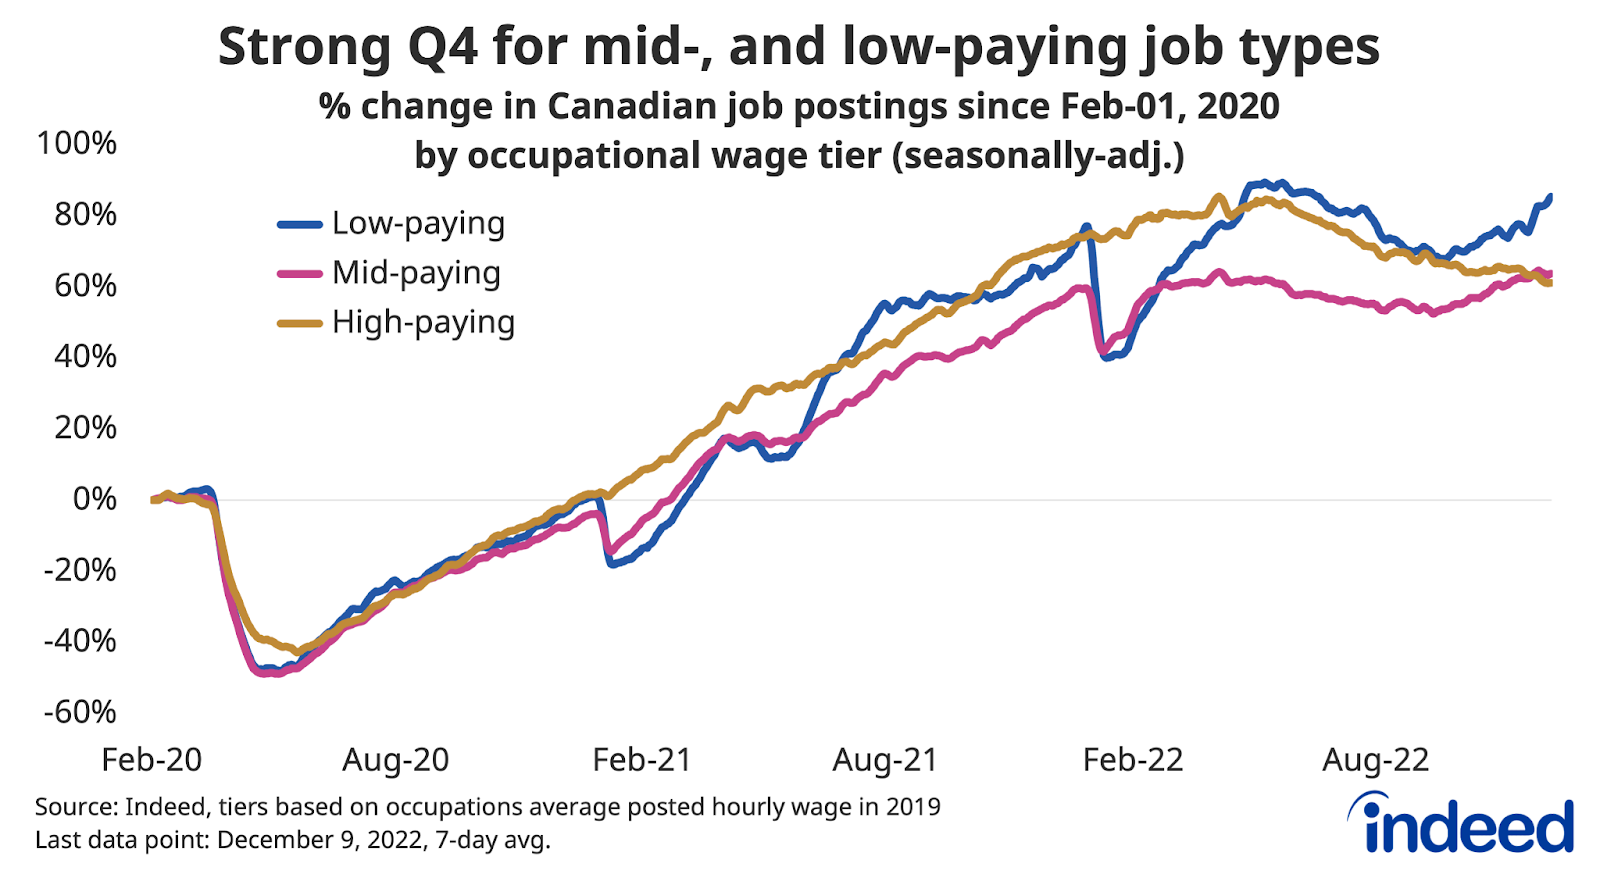 A line chart entitled “Strong Q4 for mid- and low-paying job types” shows the change in Canadian job postings on Indeed grouped by wage tiers between February 1, 2020 and December 9, 2022